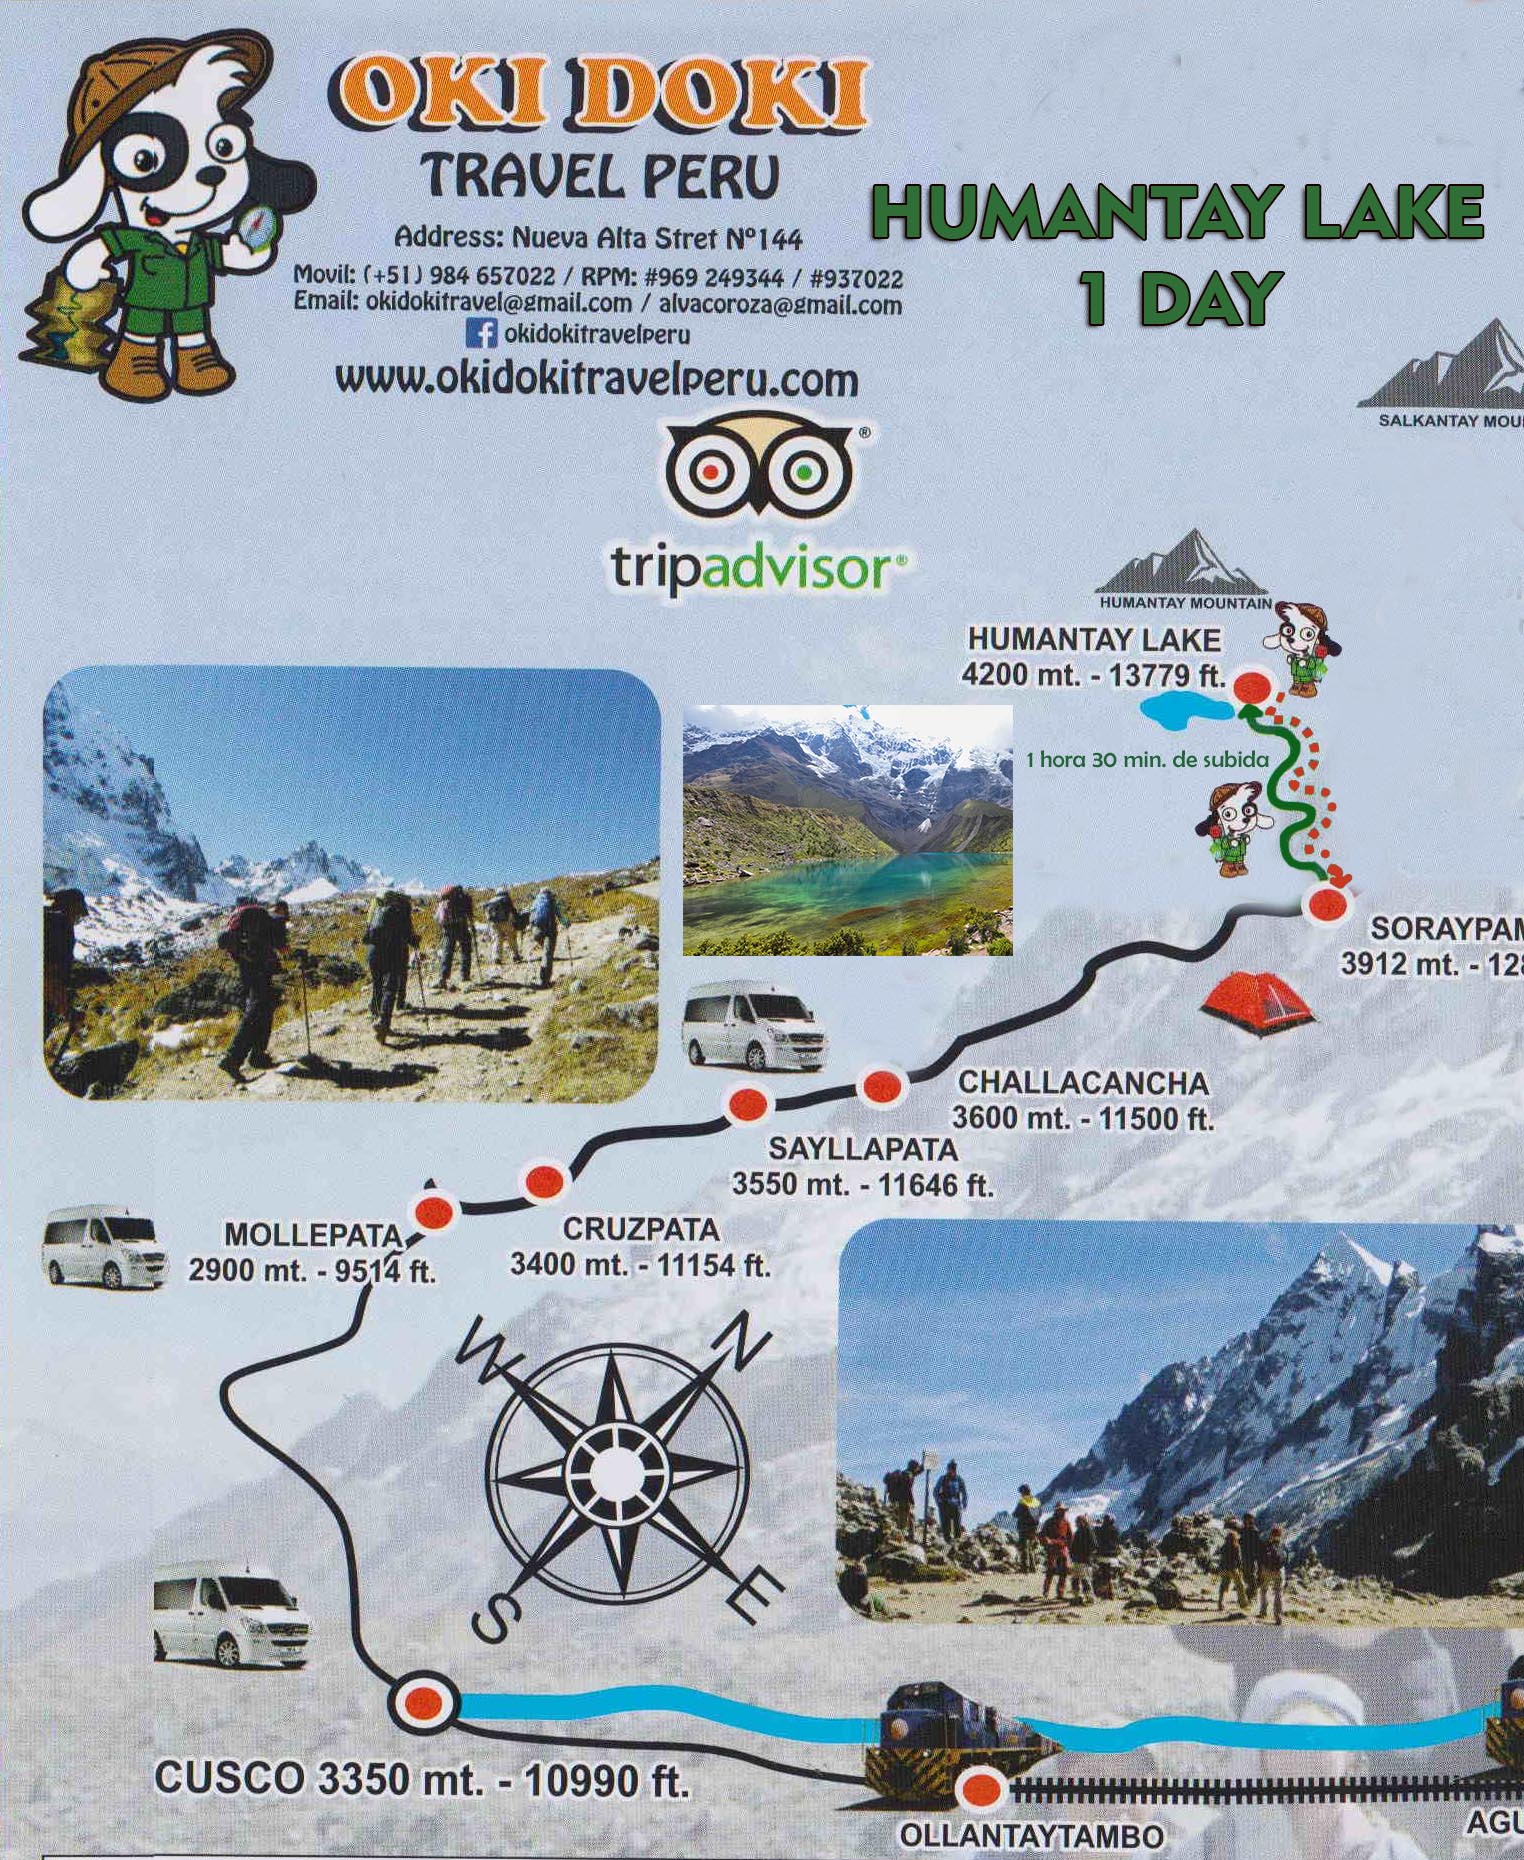 TOURS MAP: The Humantay Lake in Private Service – 1 Day - Okidoki Travel Peru